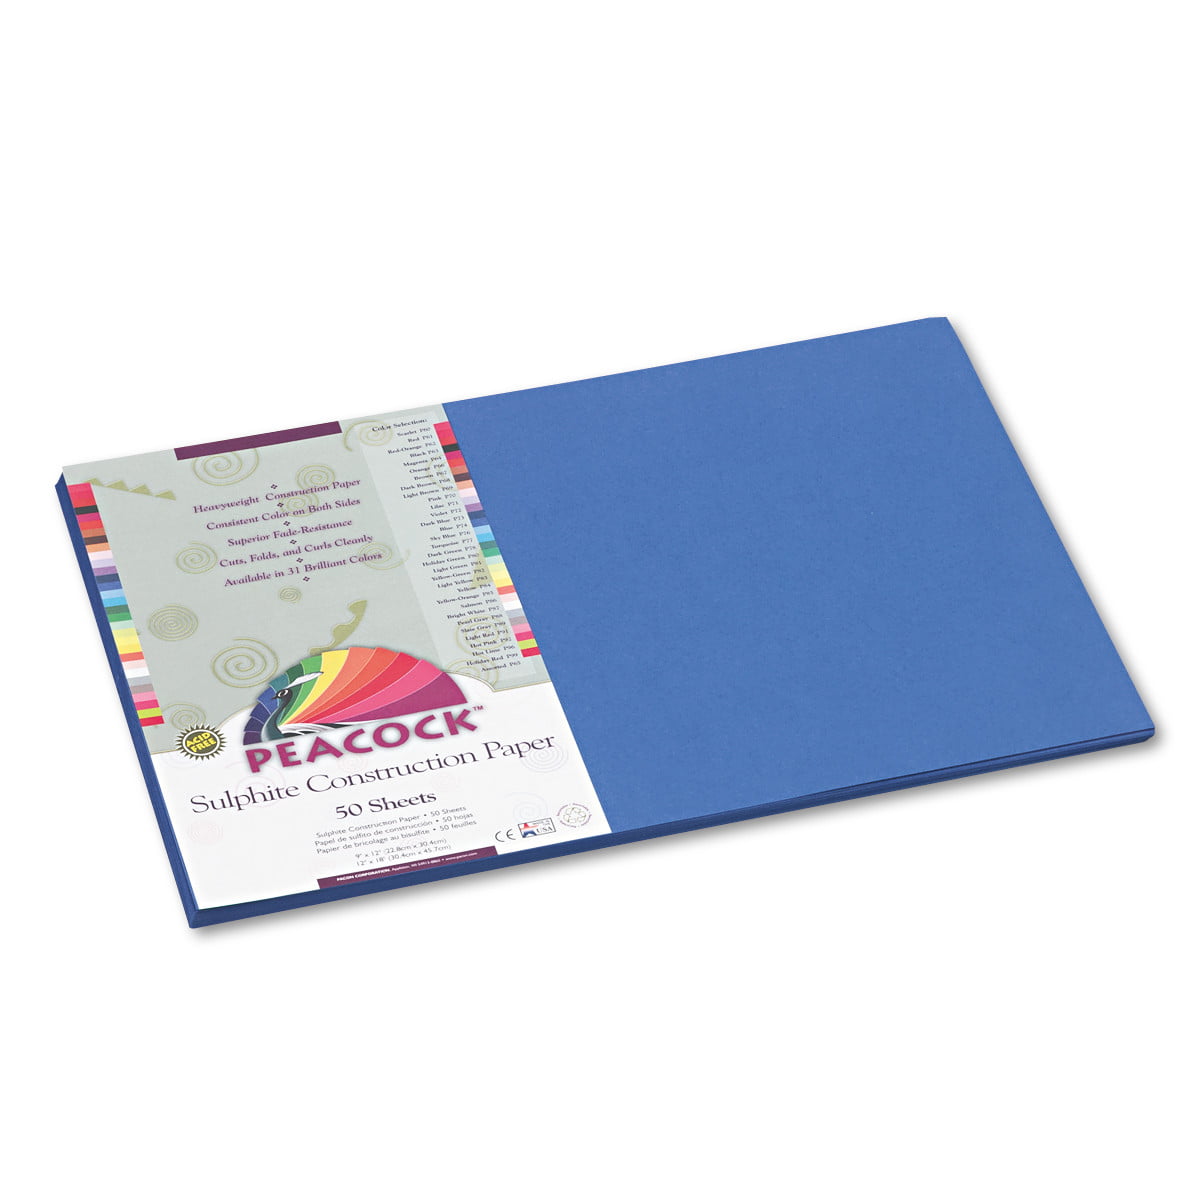 PEACOCK SULPHITE CONSTRUCTION PAPER by Pacon® PACP9909